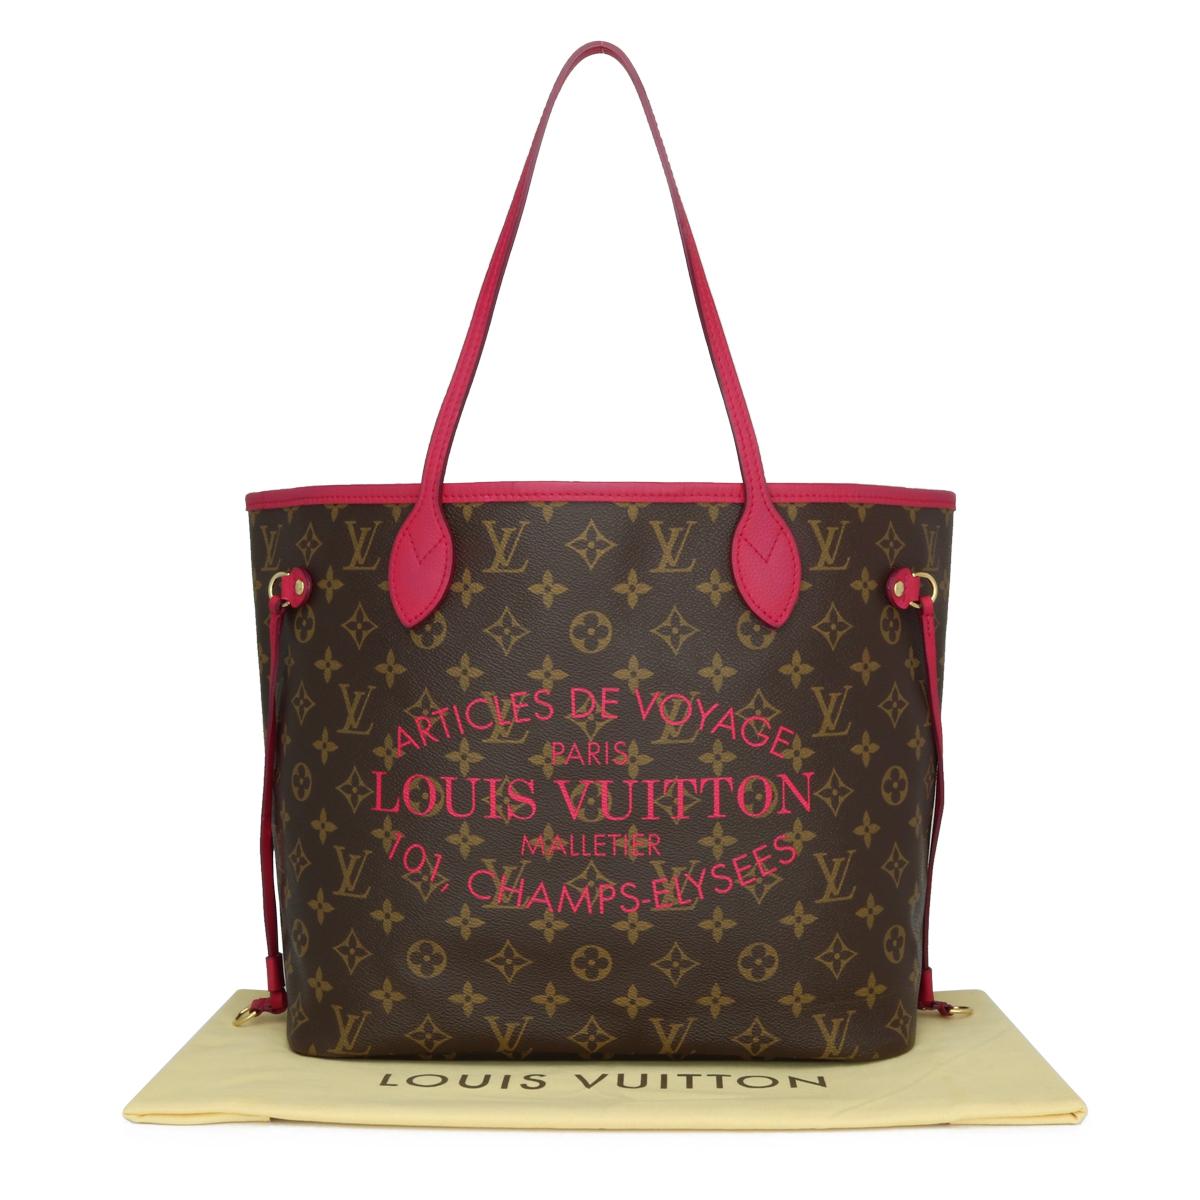 Louis Vuitton Neverfull MM Ikat Bag in Monogram Fuchsia with Fuchsia Floral Interior with Gold Hardware 2013 Limited Edition.

This bag is in very good condition.

Inspired by the sun-drenched Mediterranean, the Monogram Ikat line features the